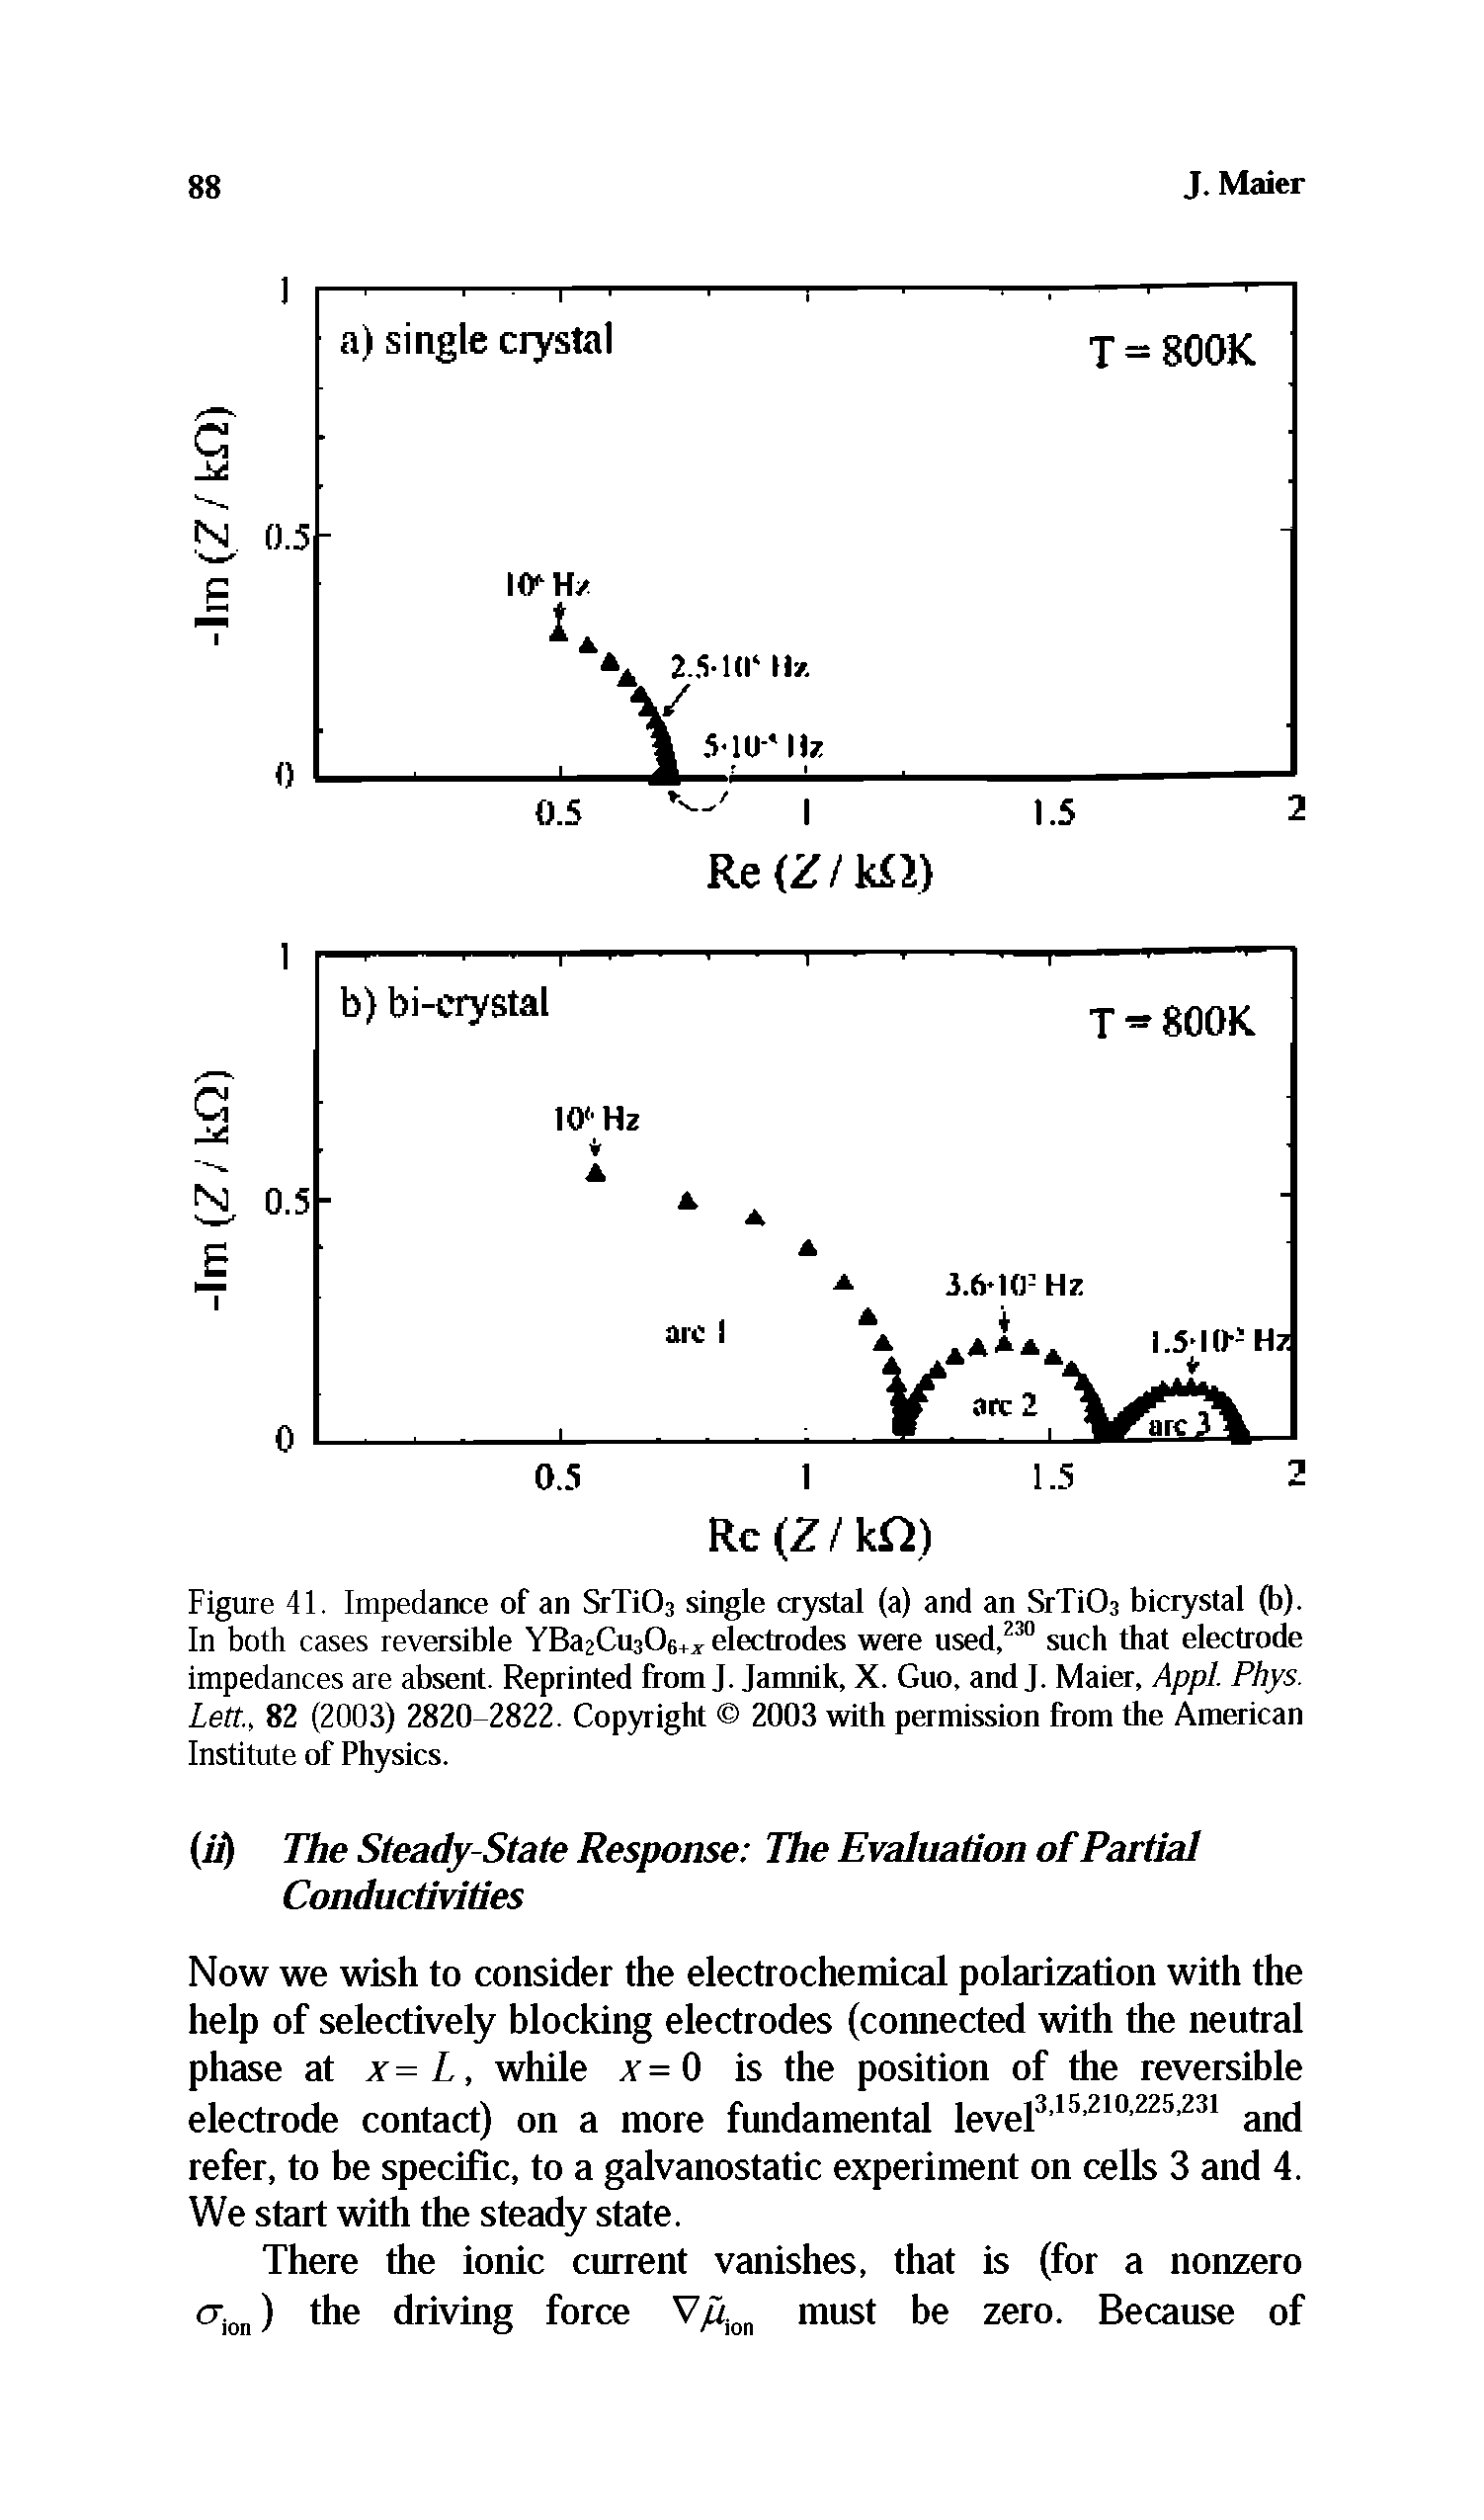 Figure 41. Impedance of an SrTi03 single crystal (a) and an SrTiO bicrystal (b). In both cases reversible YE CiriOe. electrodes were used,230 such that electrode impedances are absent. Reprinted from J. Jamnik, X. Guo, and J. Maier, Appl. Phys. Lett., 82 (2003) 2820-2822. Copyright 2003 with permission from the American Institute of Physics.